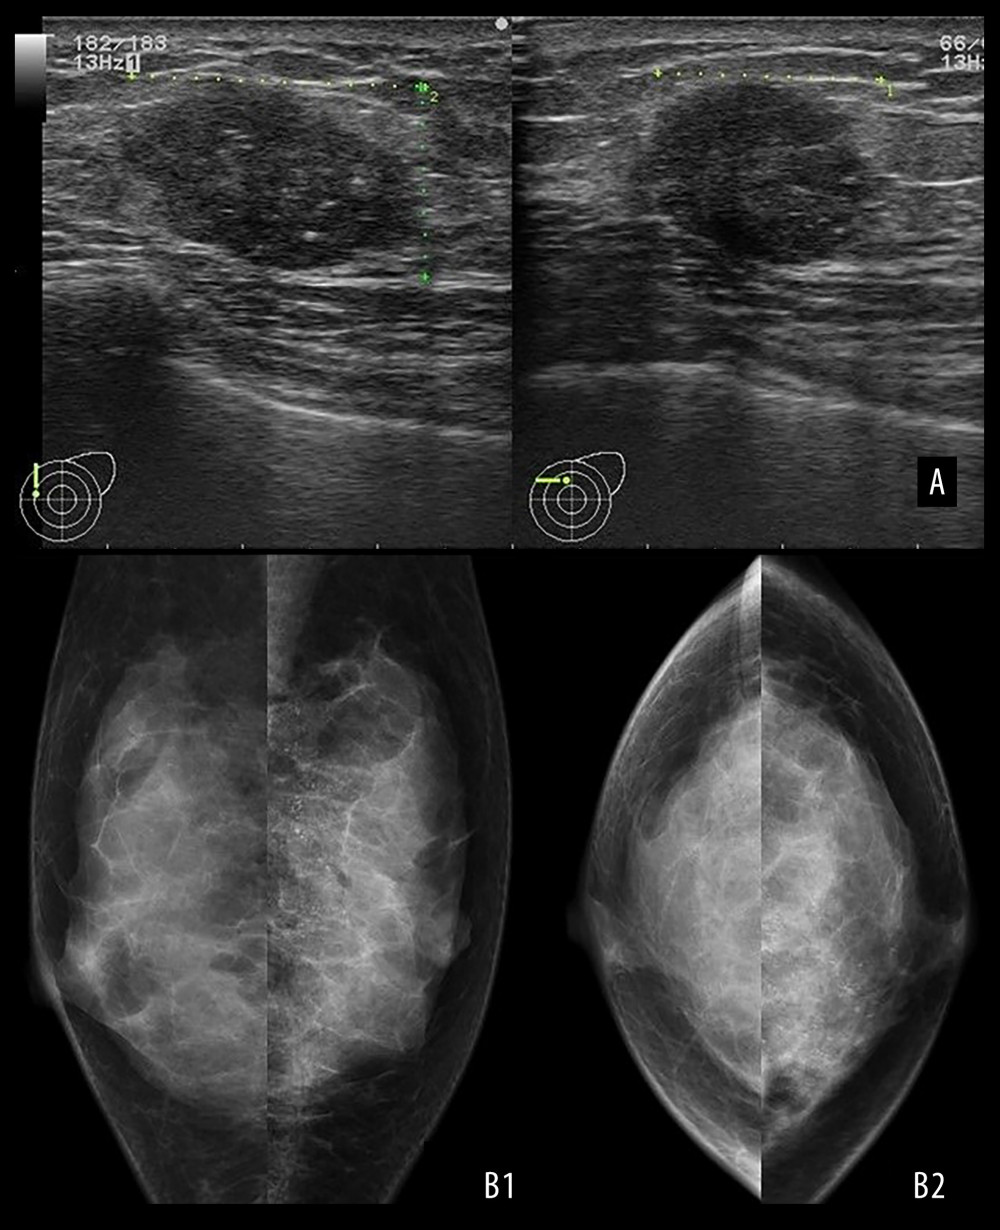 Image findings. (A) Breast ultrasonography revealed an irregularly shaped mass measuring 2.2×1.7×1.4 cm with an inhomogeneous inside and punctate high-echo contents. (B) Mammography showing pleomorphic calcifications spreading segmentary in the upper-inner quadrant of the left breast. (B1: MLO, B2: CC)